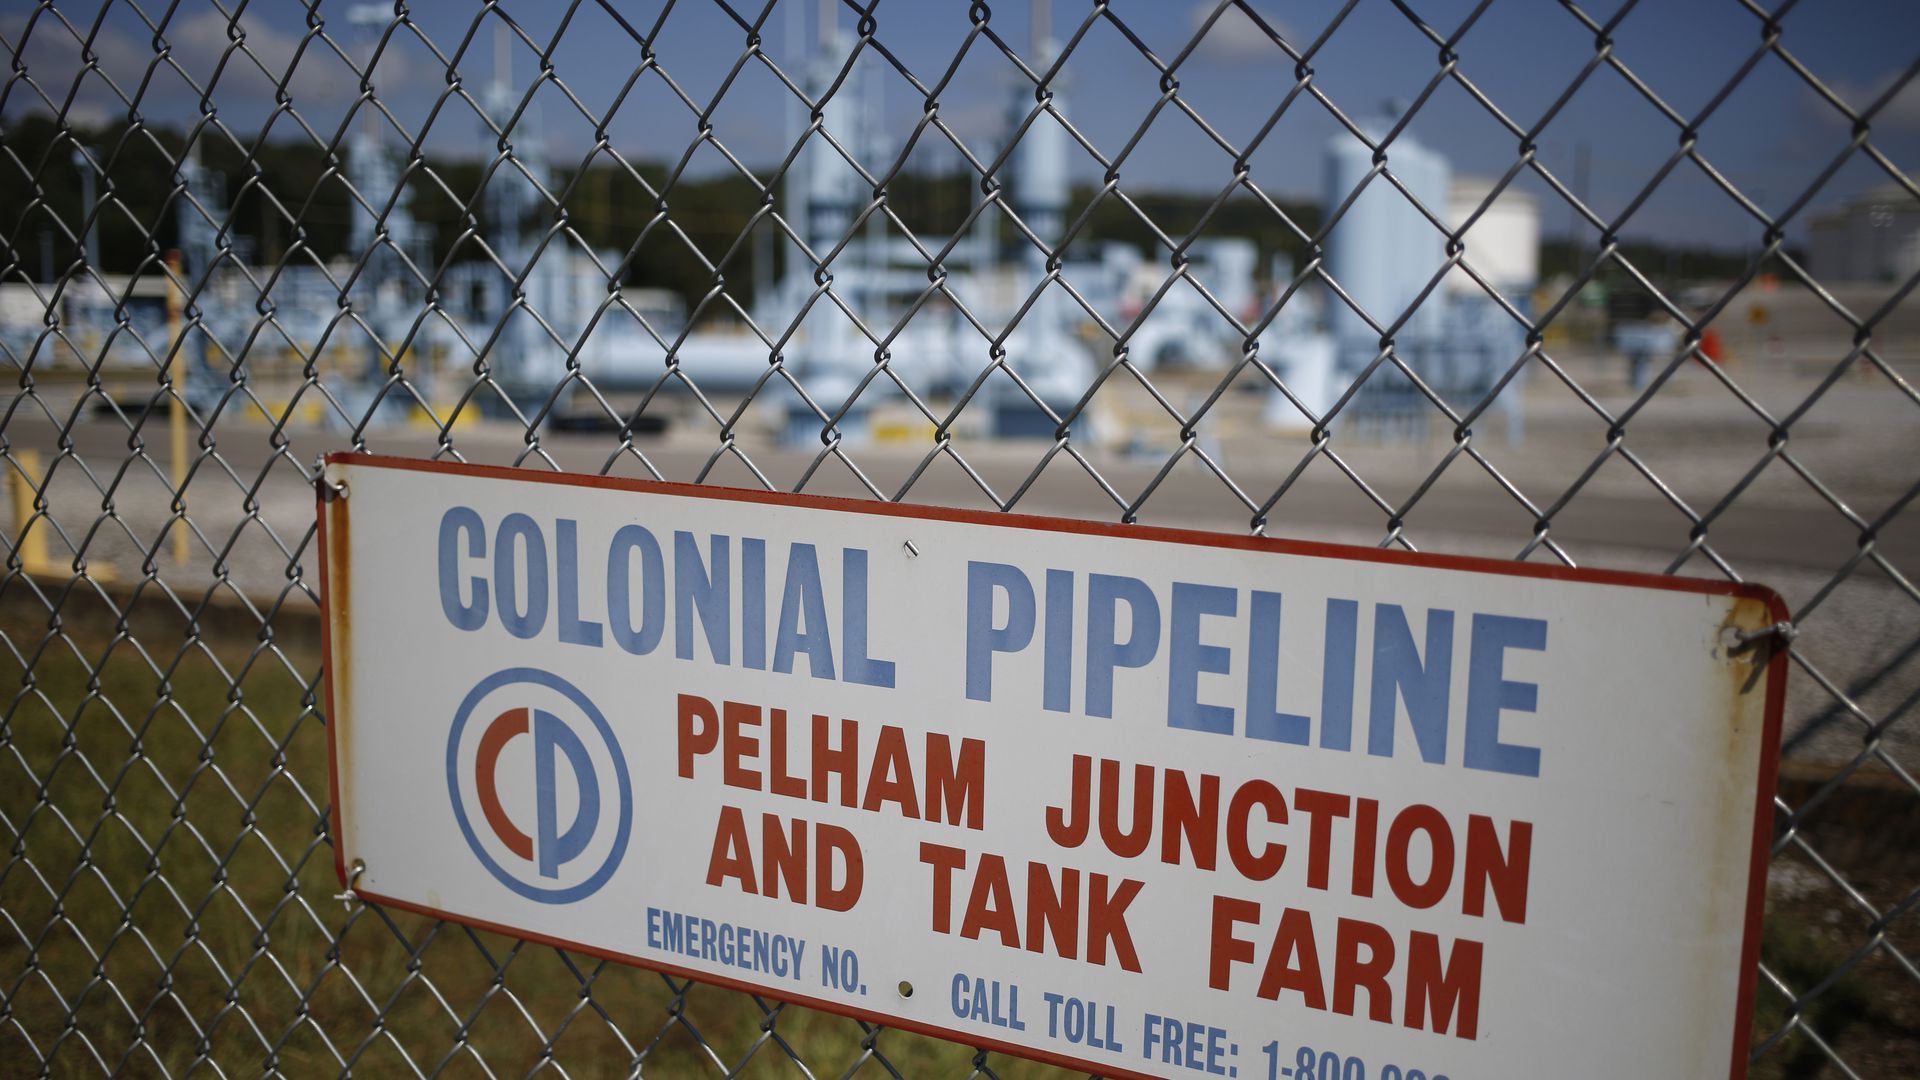 A Colonial Pipeline sign in front of Pelham Junction and Tank Farm